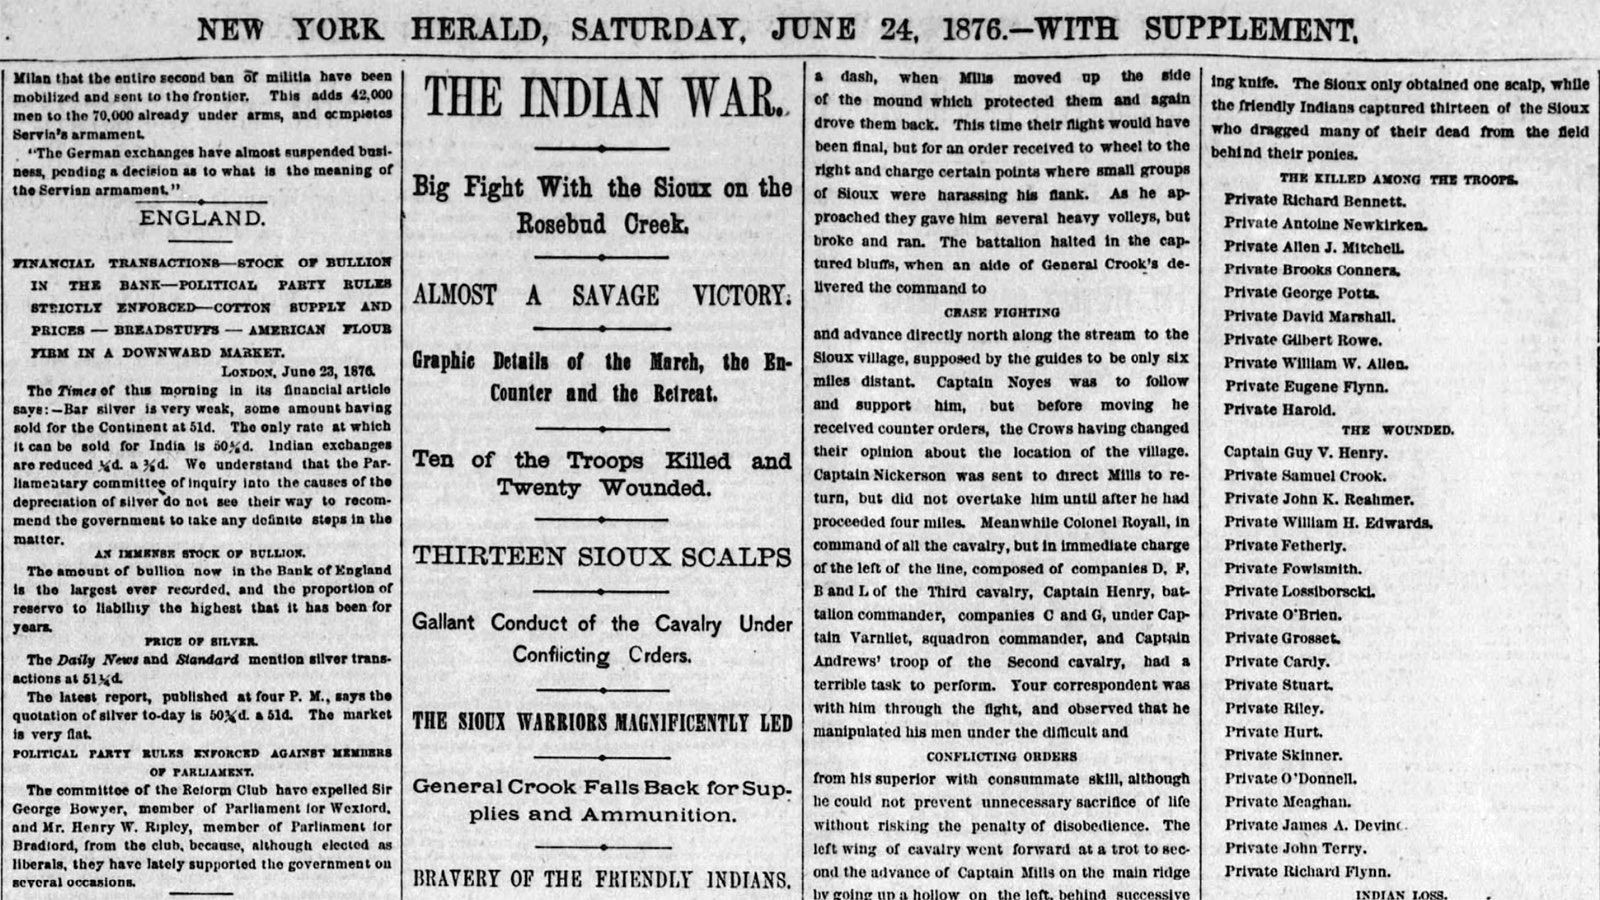 The New York Herald carried an account of the Battle of the Rosebud on Saturday, June 24, 1876.